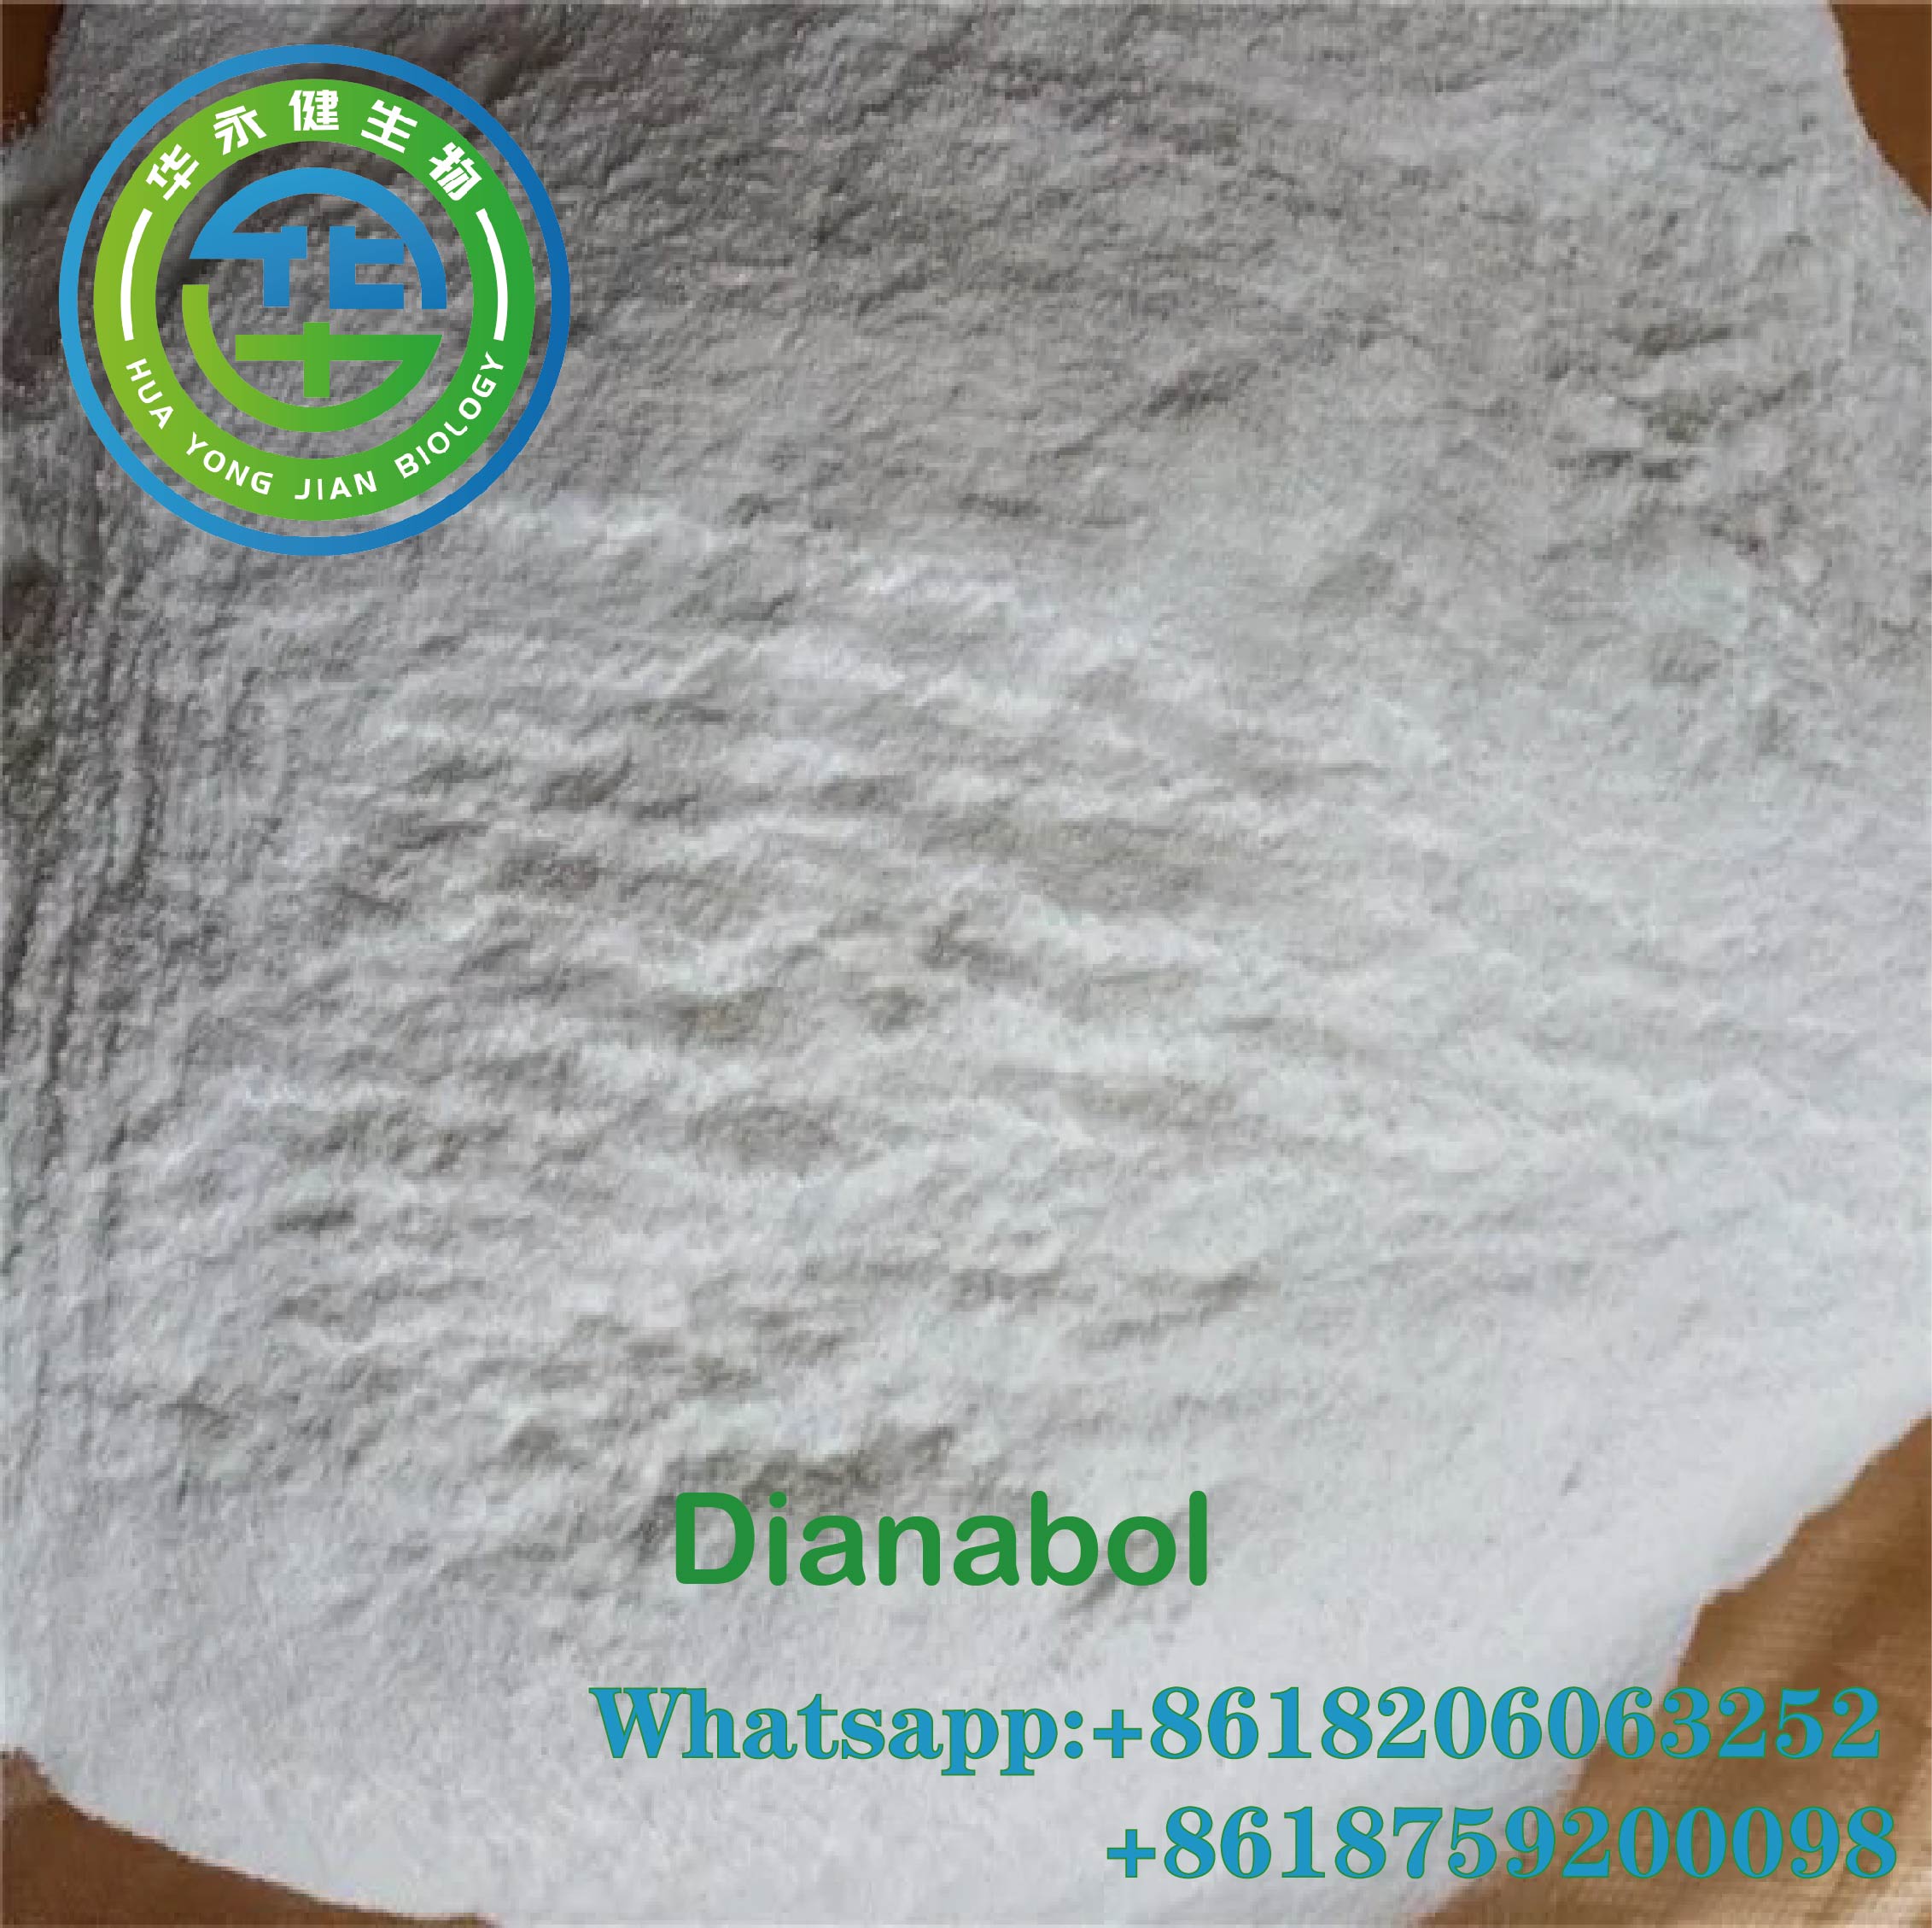 99% Methandrostenolone Weight Loss Powder Dianabol Muscle Growth Bodybuilding CasNO.72-63-9